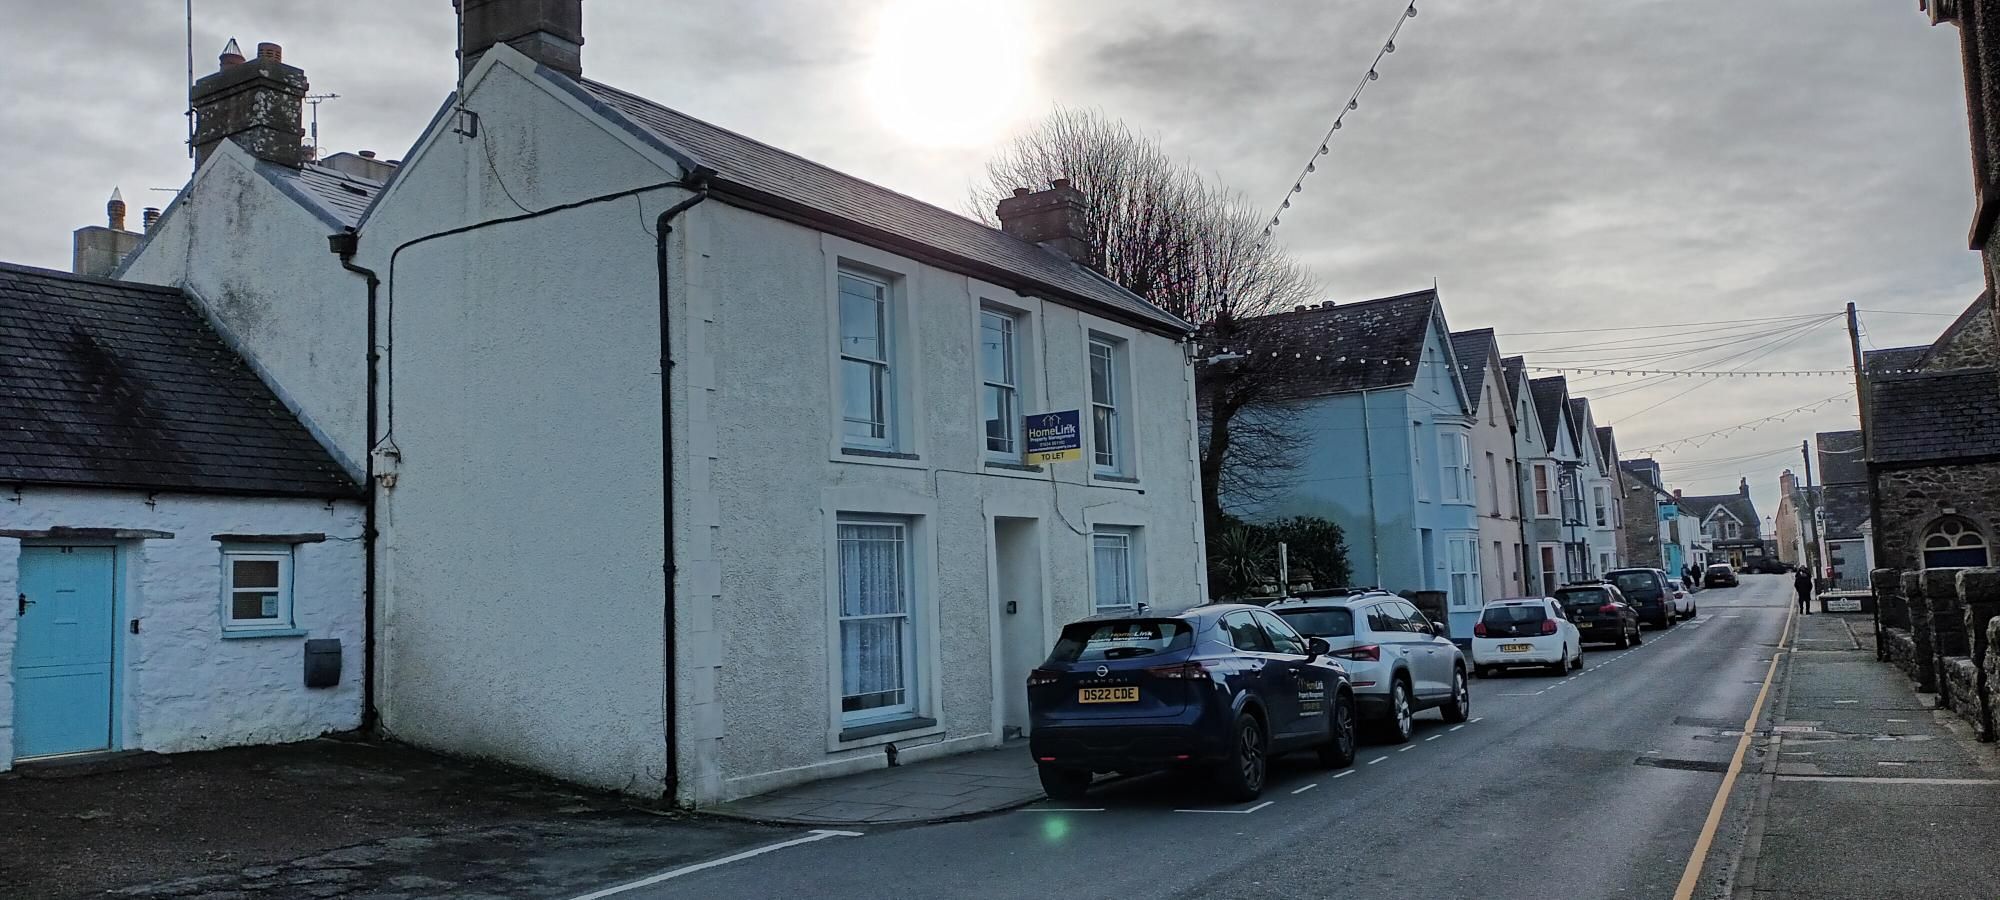 1 bed semi-detached house to rent in Ty llwyn, St Davids, SA62